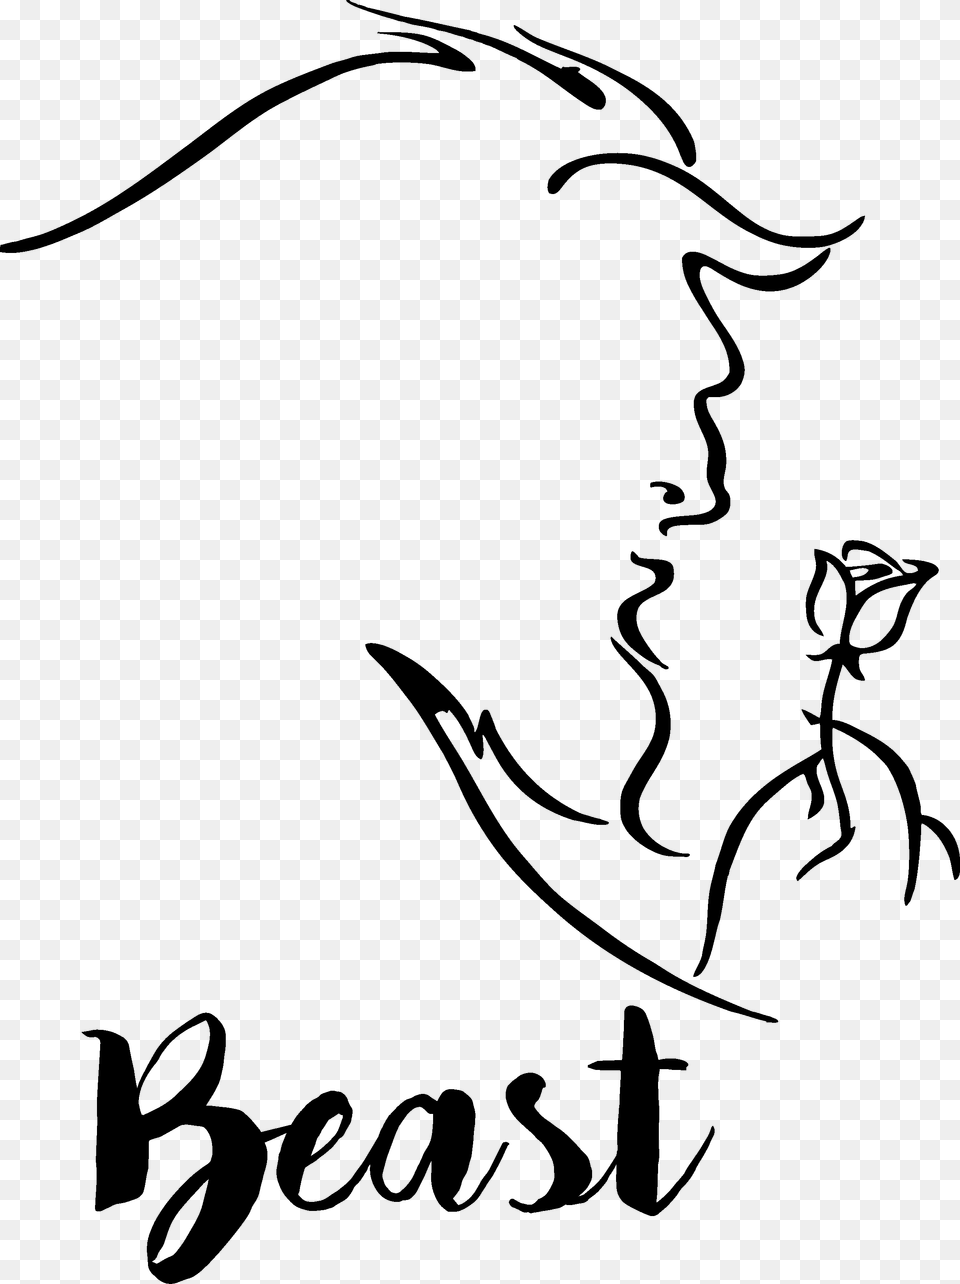 Latest Beauty And The Beast Clip Art This Week Holiday Beauty And The Beast Sketch, Green, Text Png